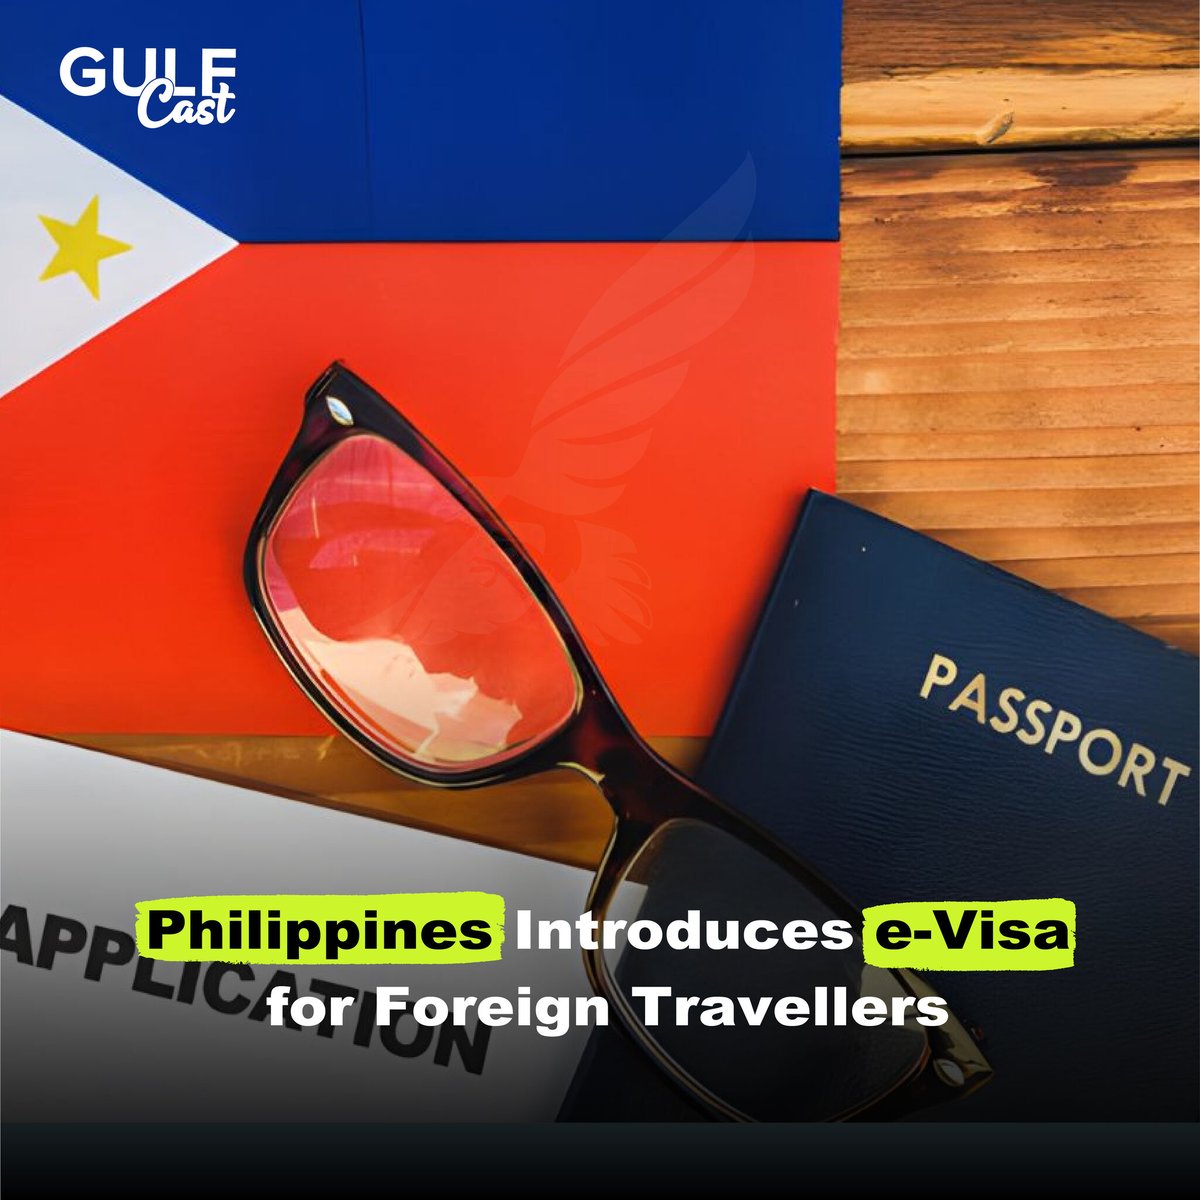 The Philippines is launching its e-Visa system in 2023, for travelers. This digital innovation will enhance convenience, efficiency, and attract more visitors to the country. #Philippines #eVisaSystem #TravelRevolution #traveler #foreigners #gulfcast